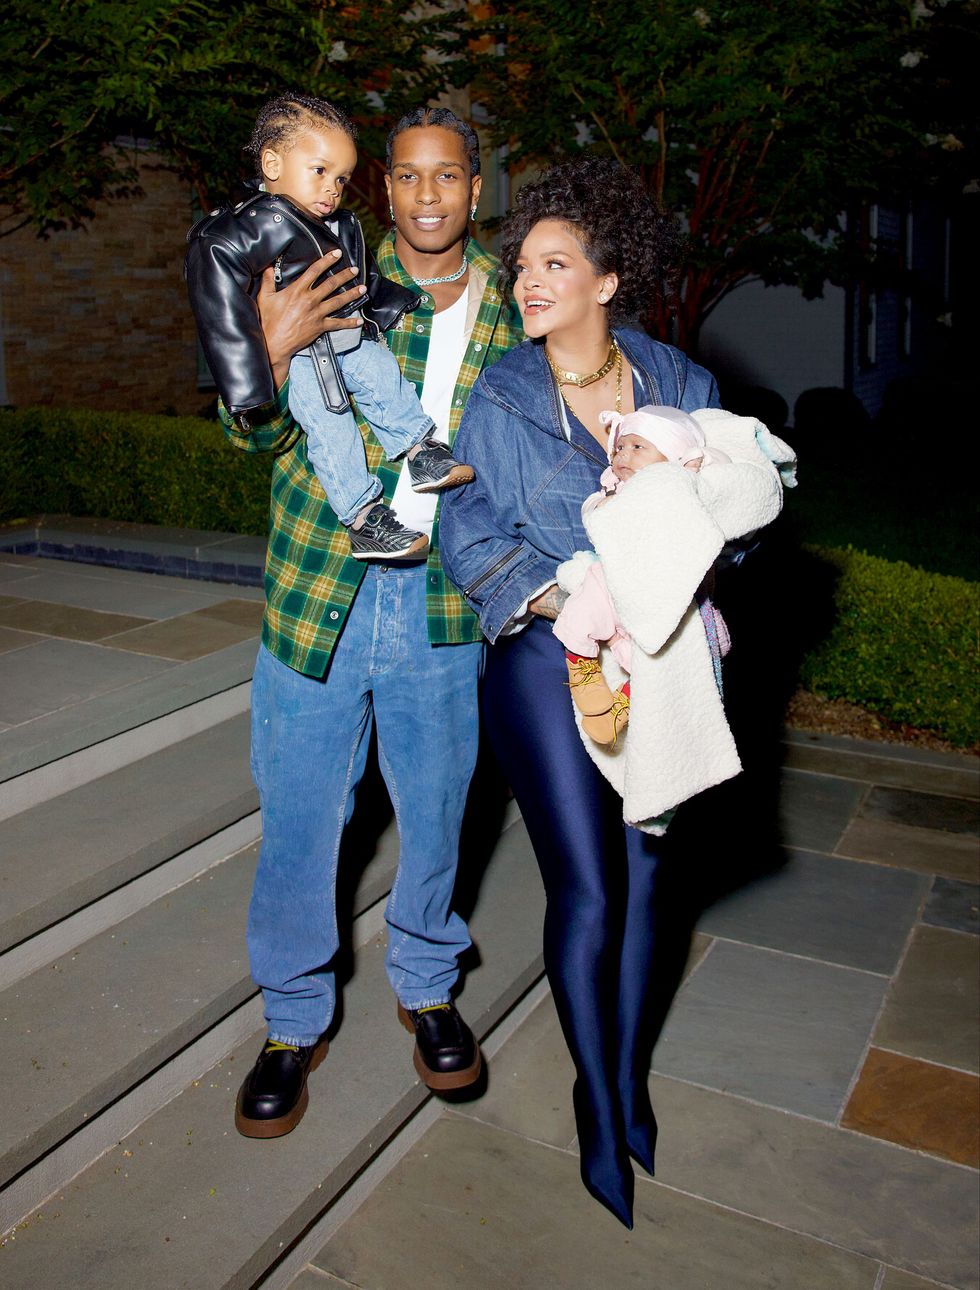 Rihanna and A$AP Rocky's kid RZA has the best baby sneakers in the universe